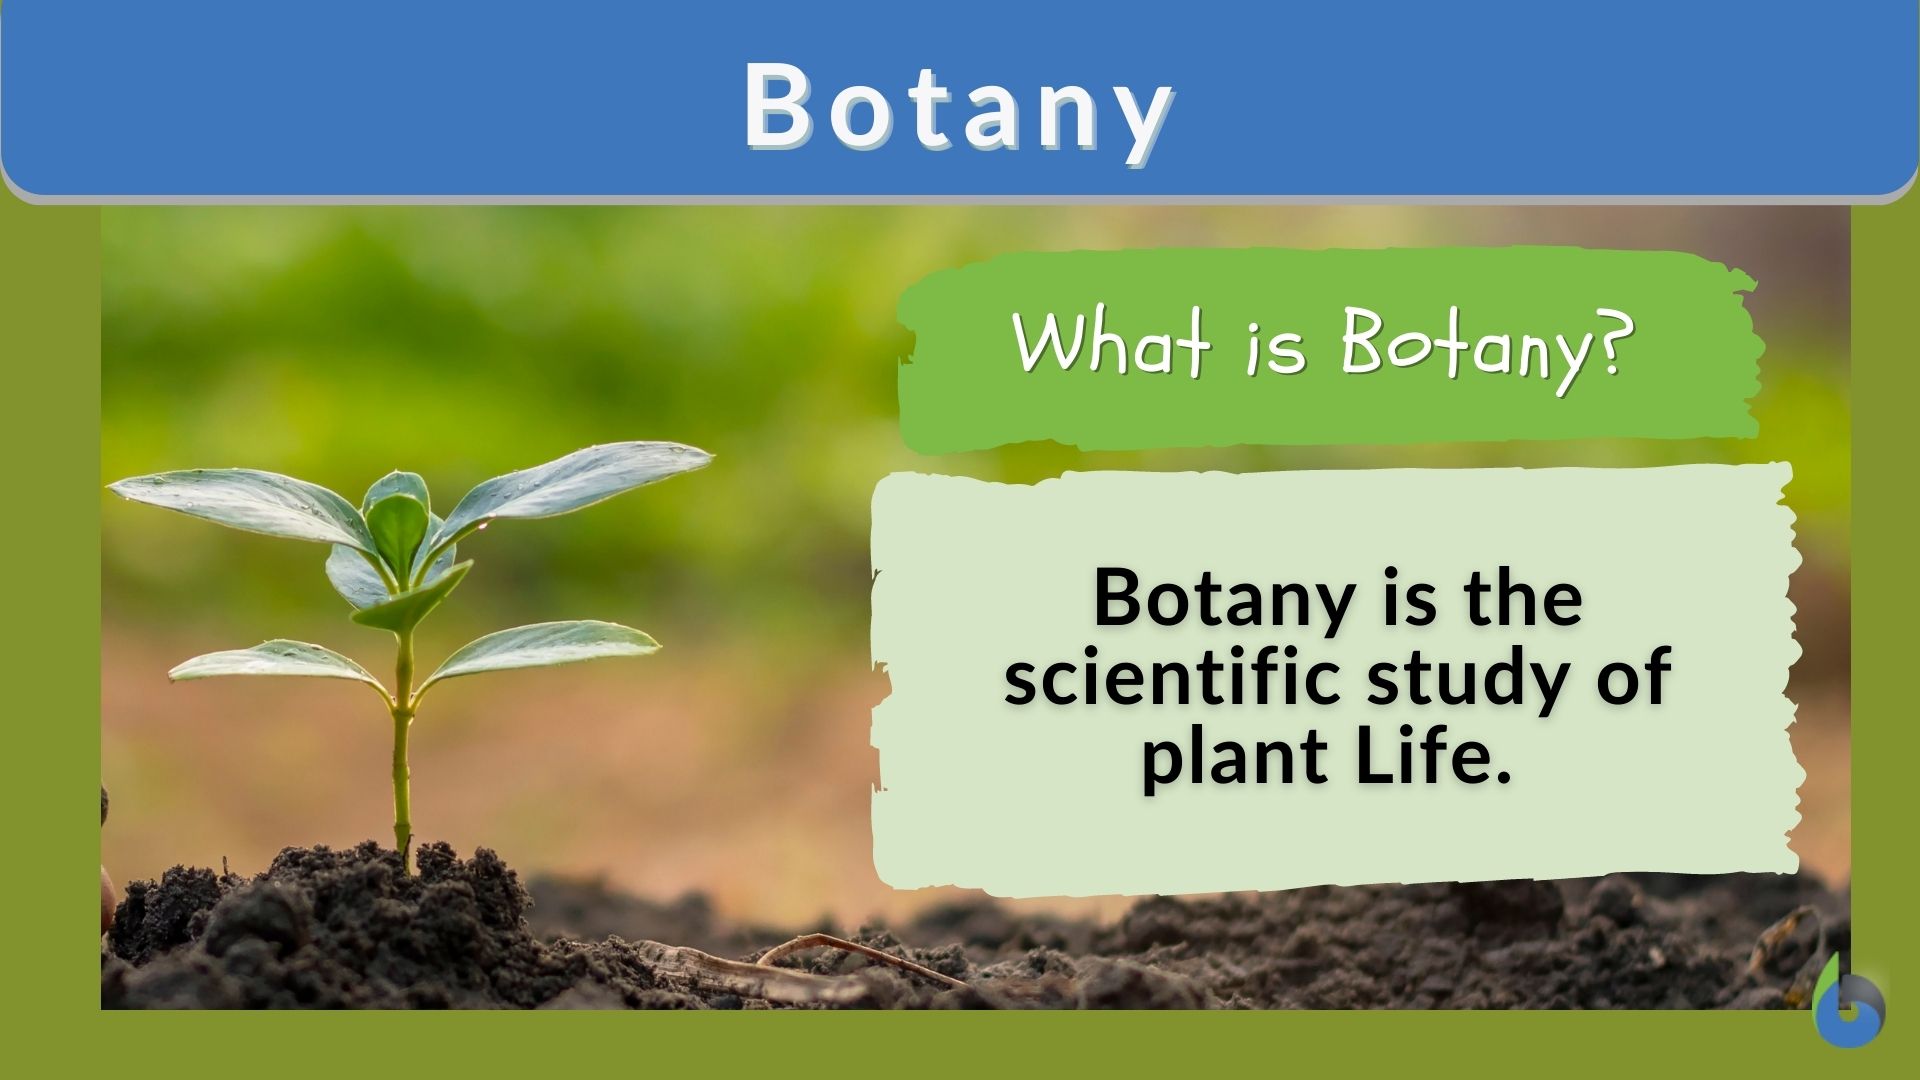 Botany - Definition and Examples - Biology Online Dictionary